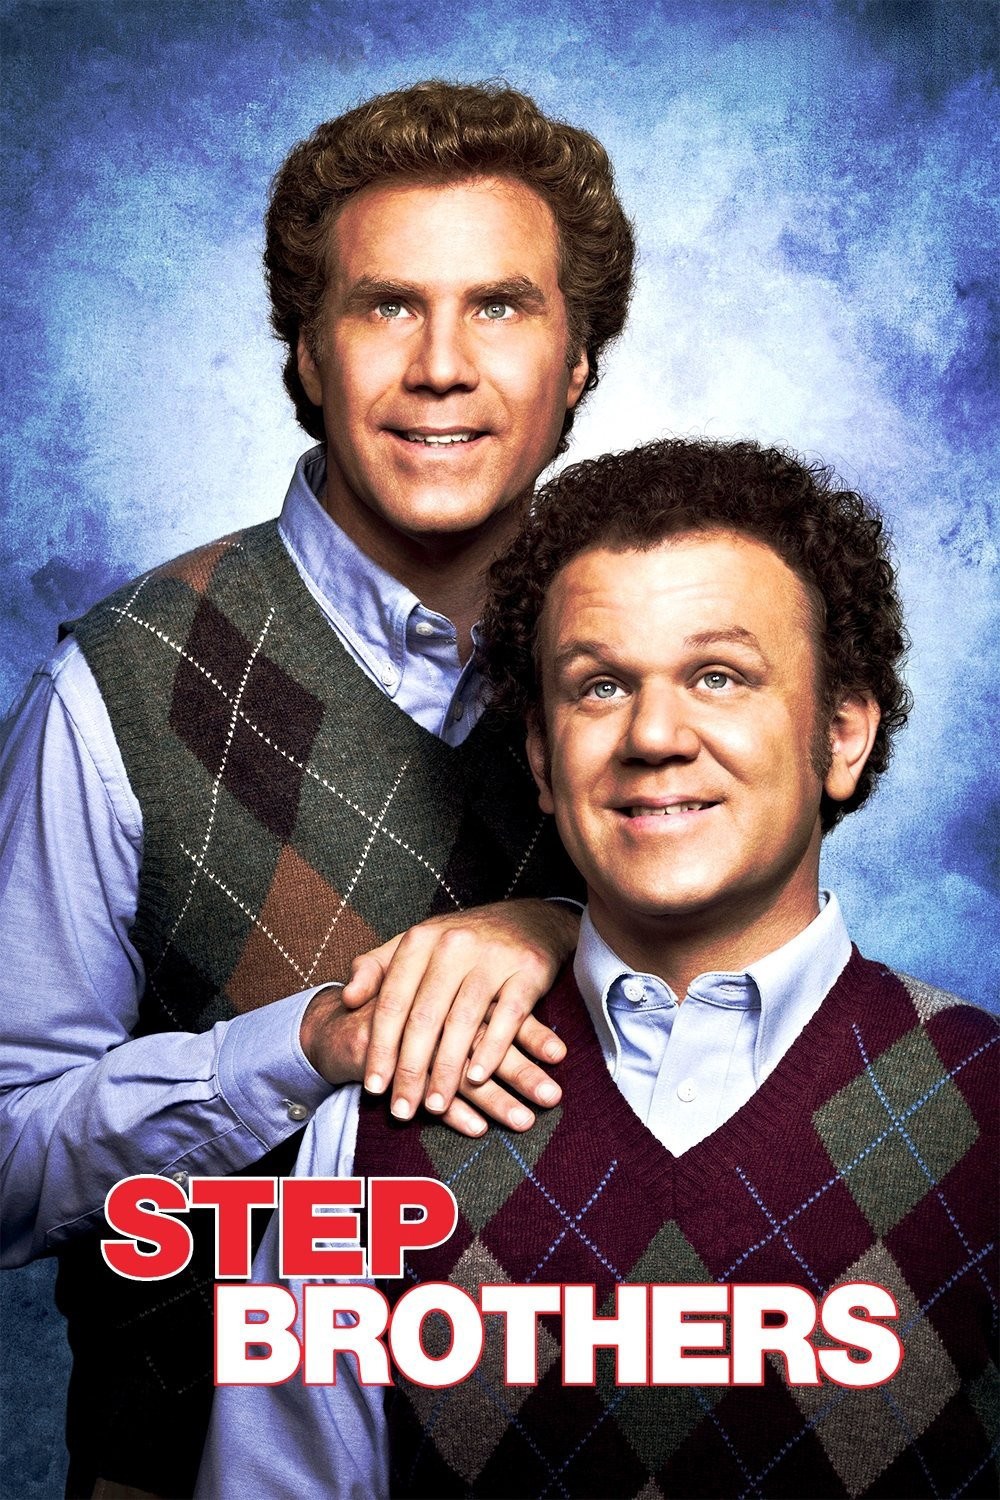 Step brothers 2017 unrated edition dvdrip axxo french subtitles